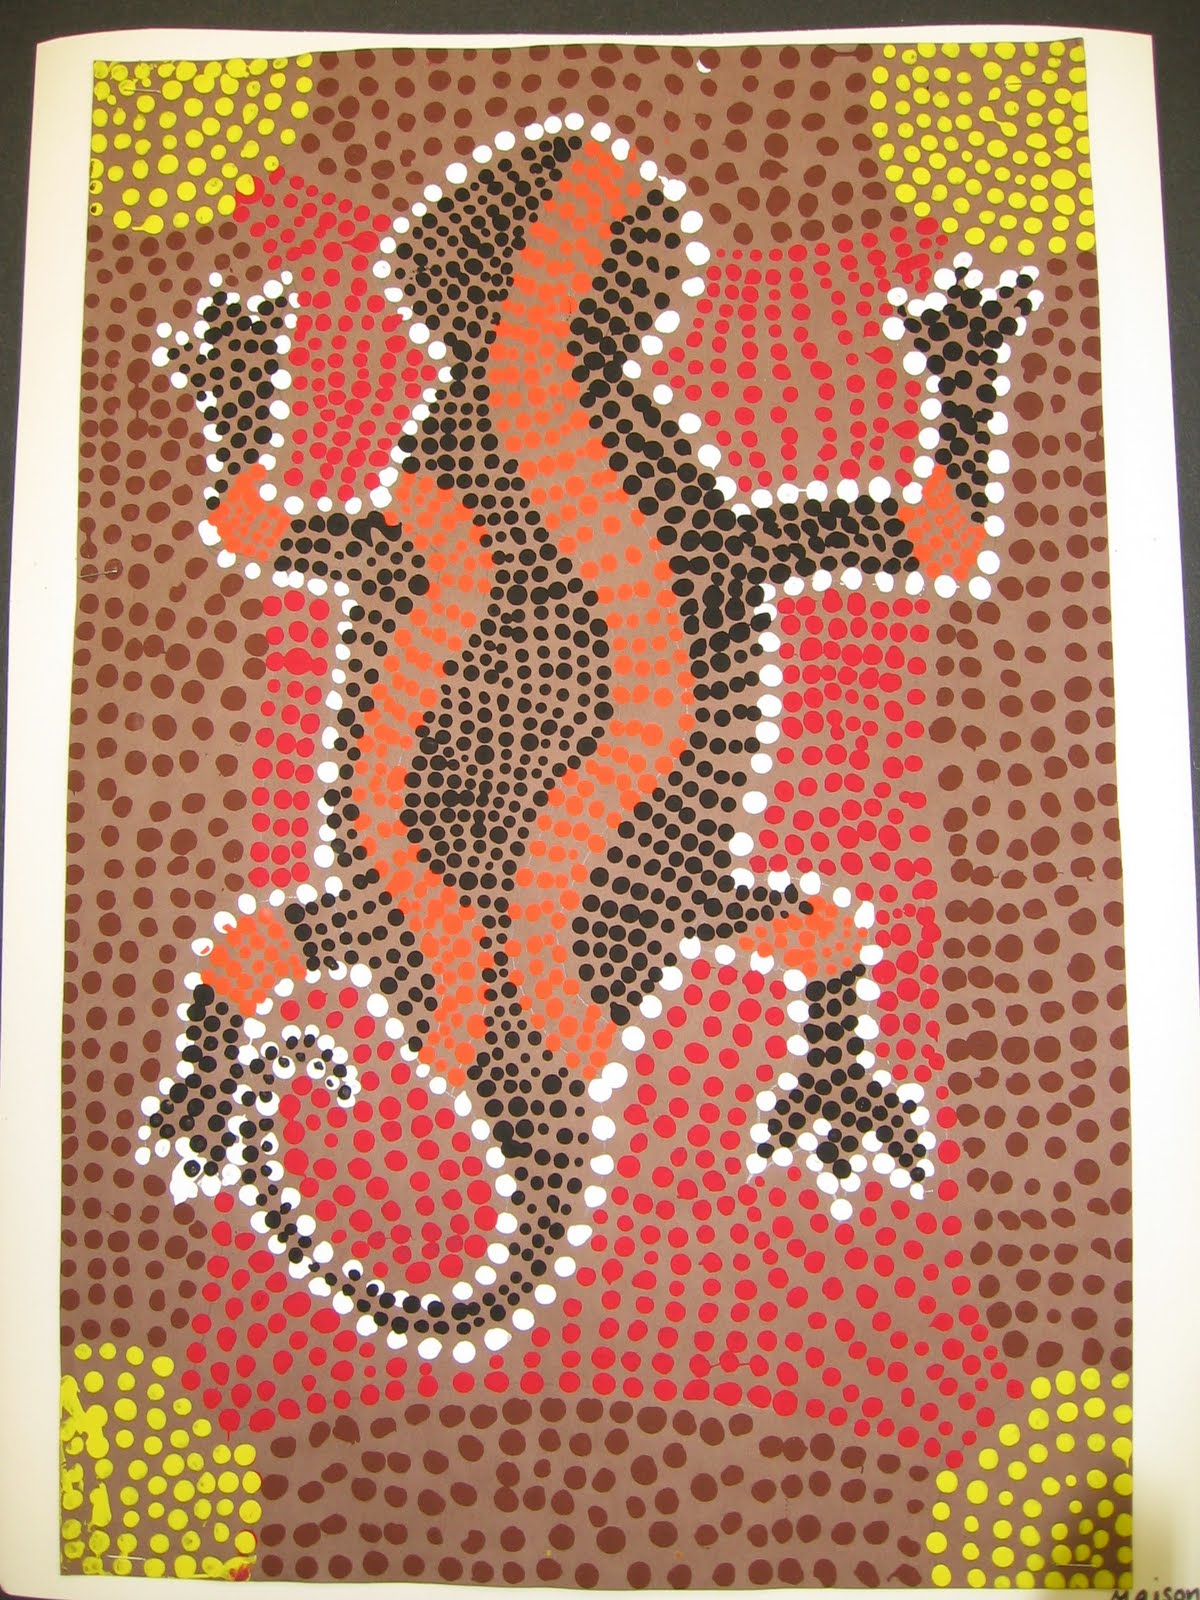 5th graders studied aboriginal art of Australia and created these dot 